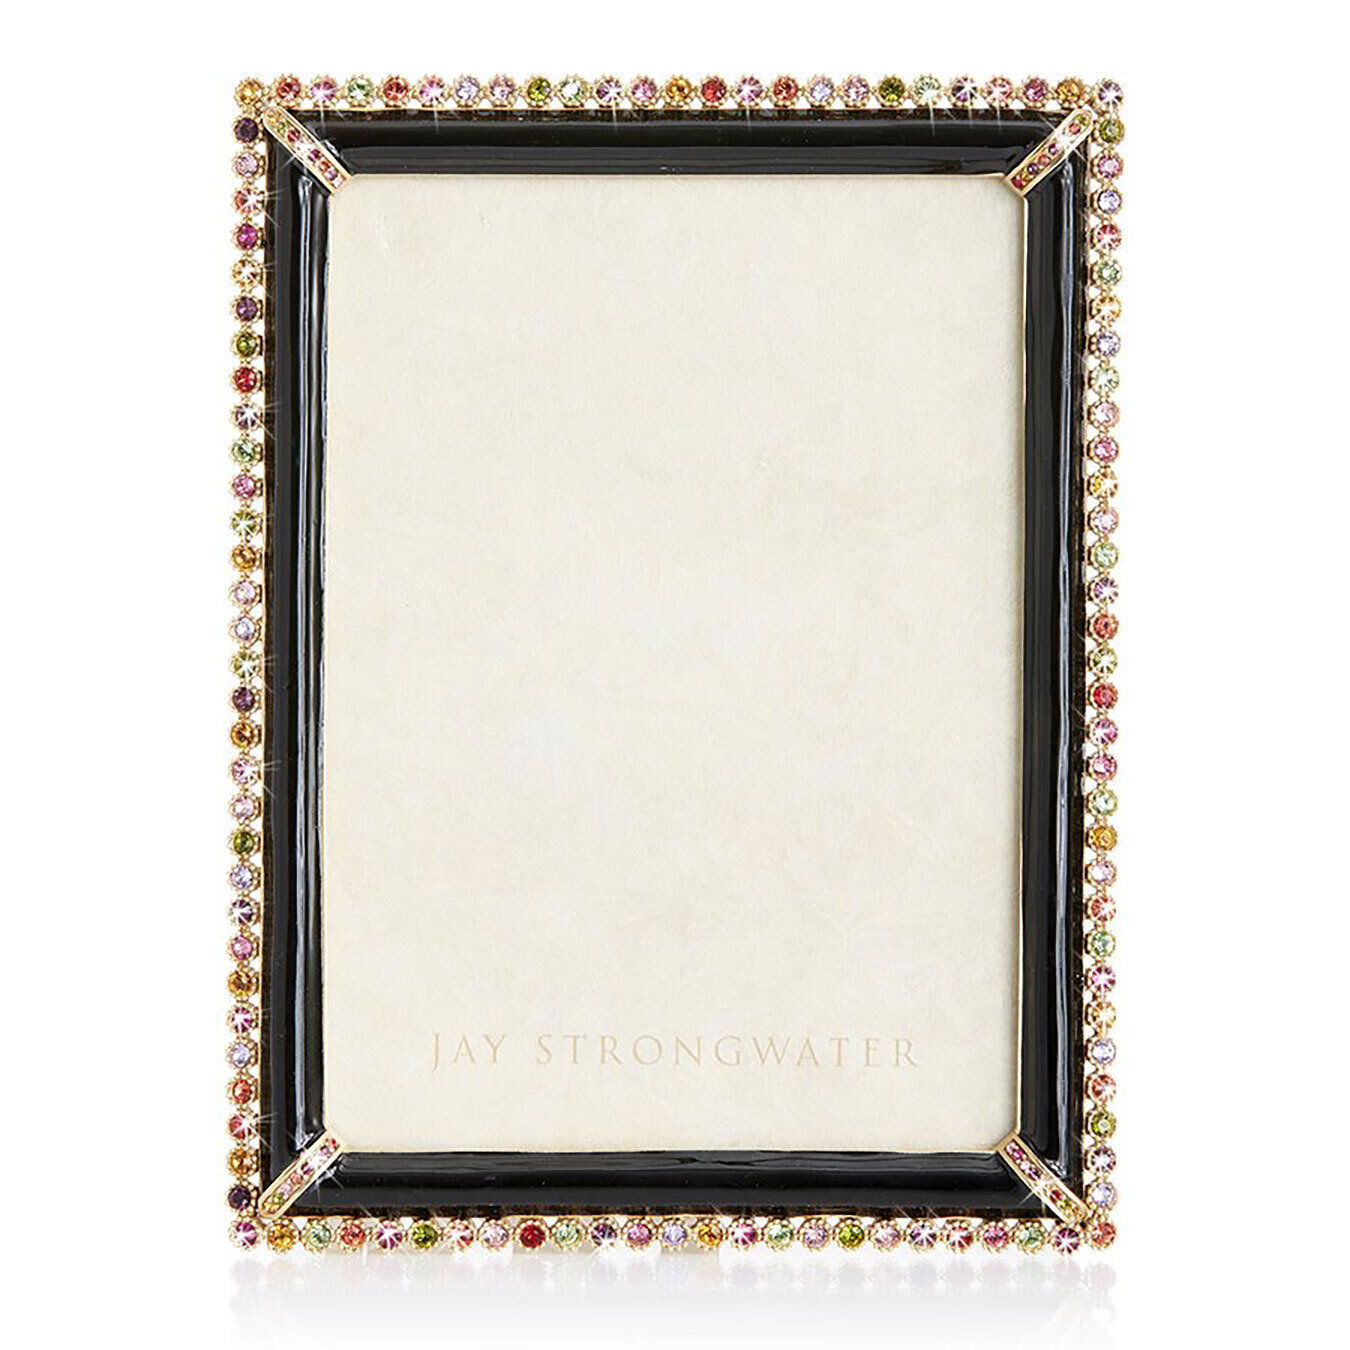 Jay Strongwater Stone Edge 5" x 7" Picture Frame SPF5511-250